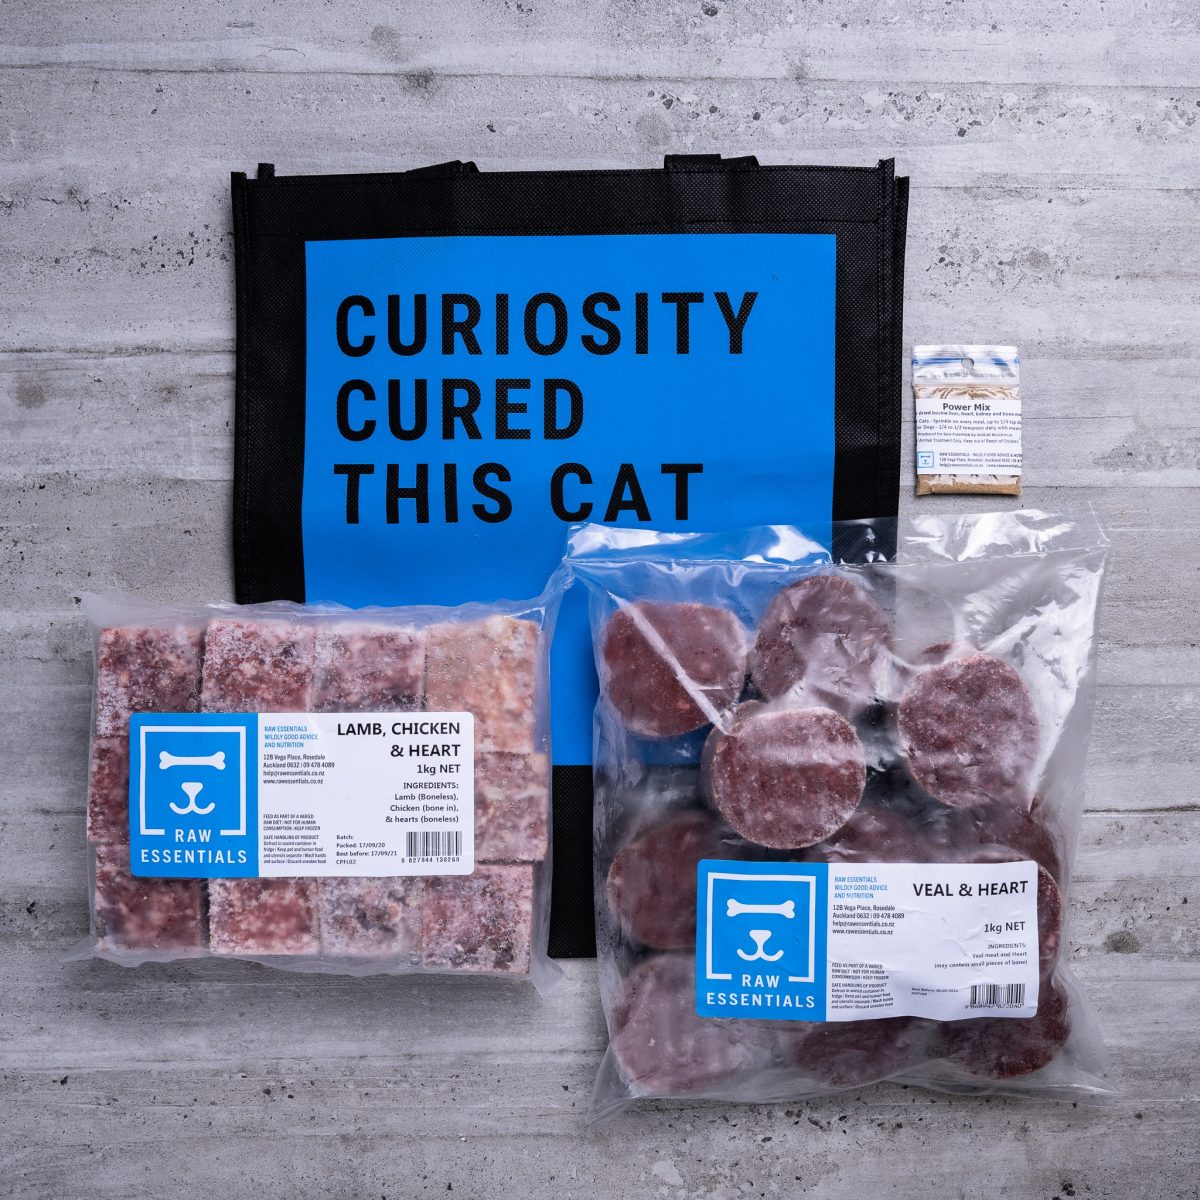 Assortment Of Raw Essential Products For Cats Including, Blue And Black Tote Bag With "Curiosity Cured This Cat" Written,  Sample Bag Of Power Mix, 1KG Plastic Pack Of Veal And Heart Mix , 1KG Plastic Pack Of Cubed Lamb, Chicken, Heart Mix.